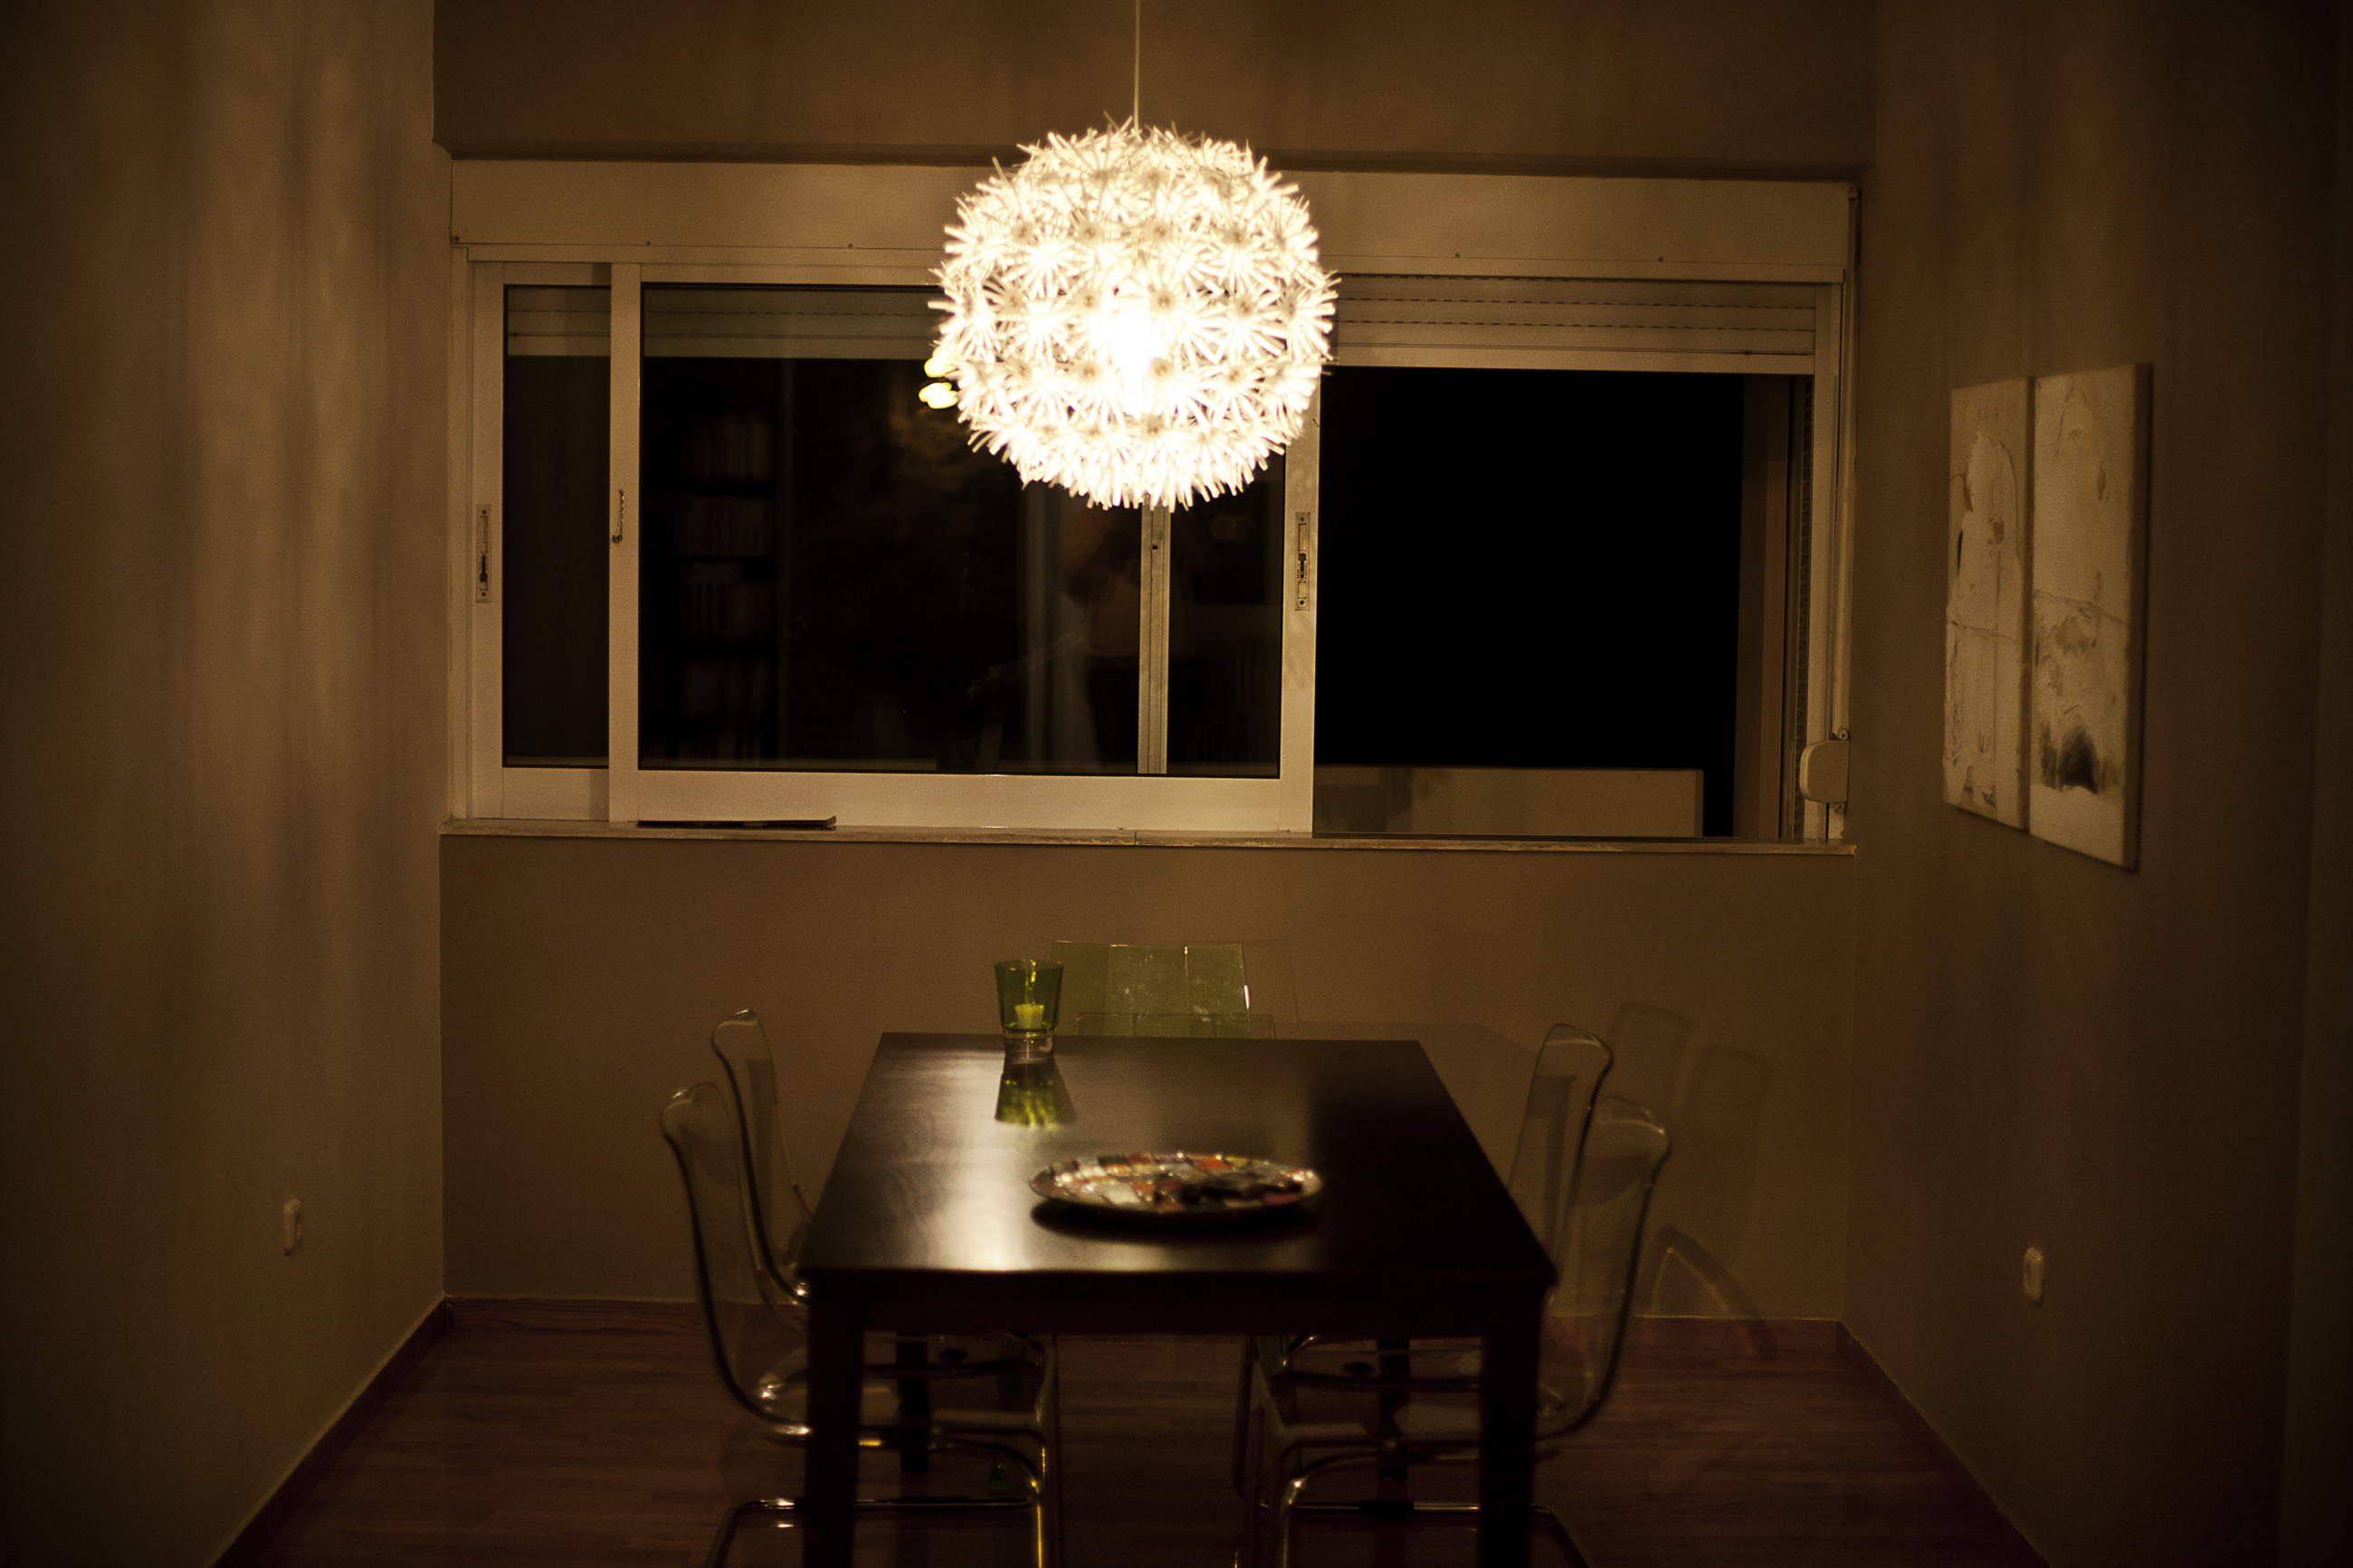 At Emmy's house, an empty table waits for someone who will never come [Paulo Siqueira/Al Jazeera]